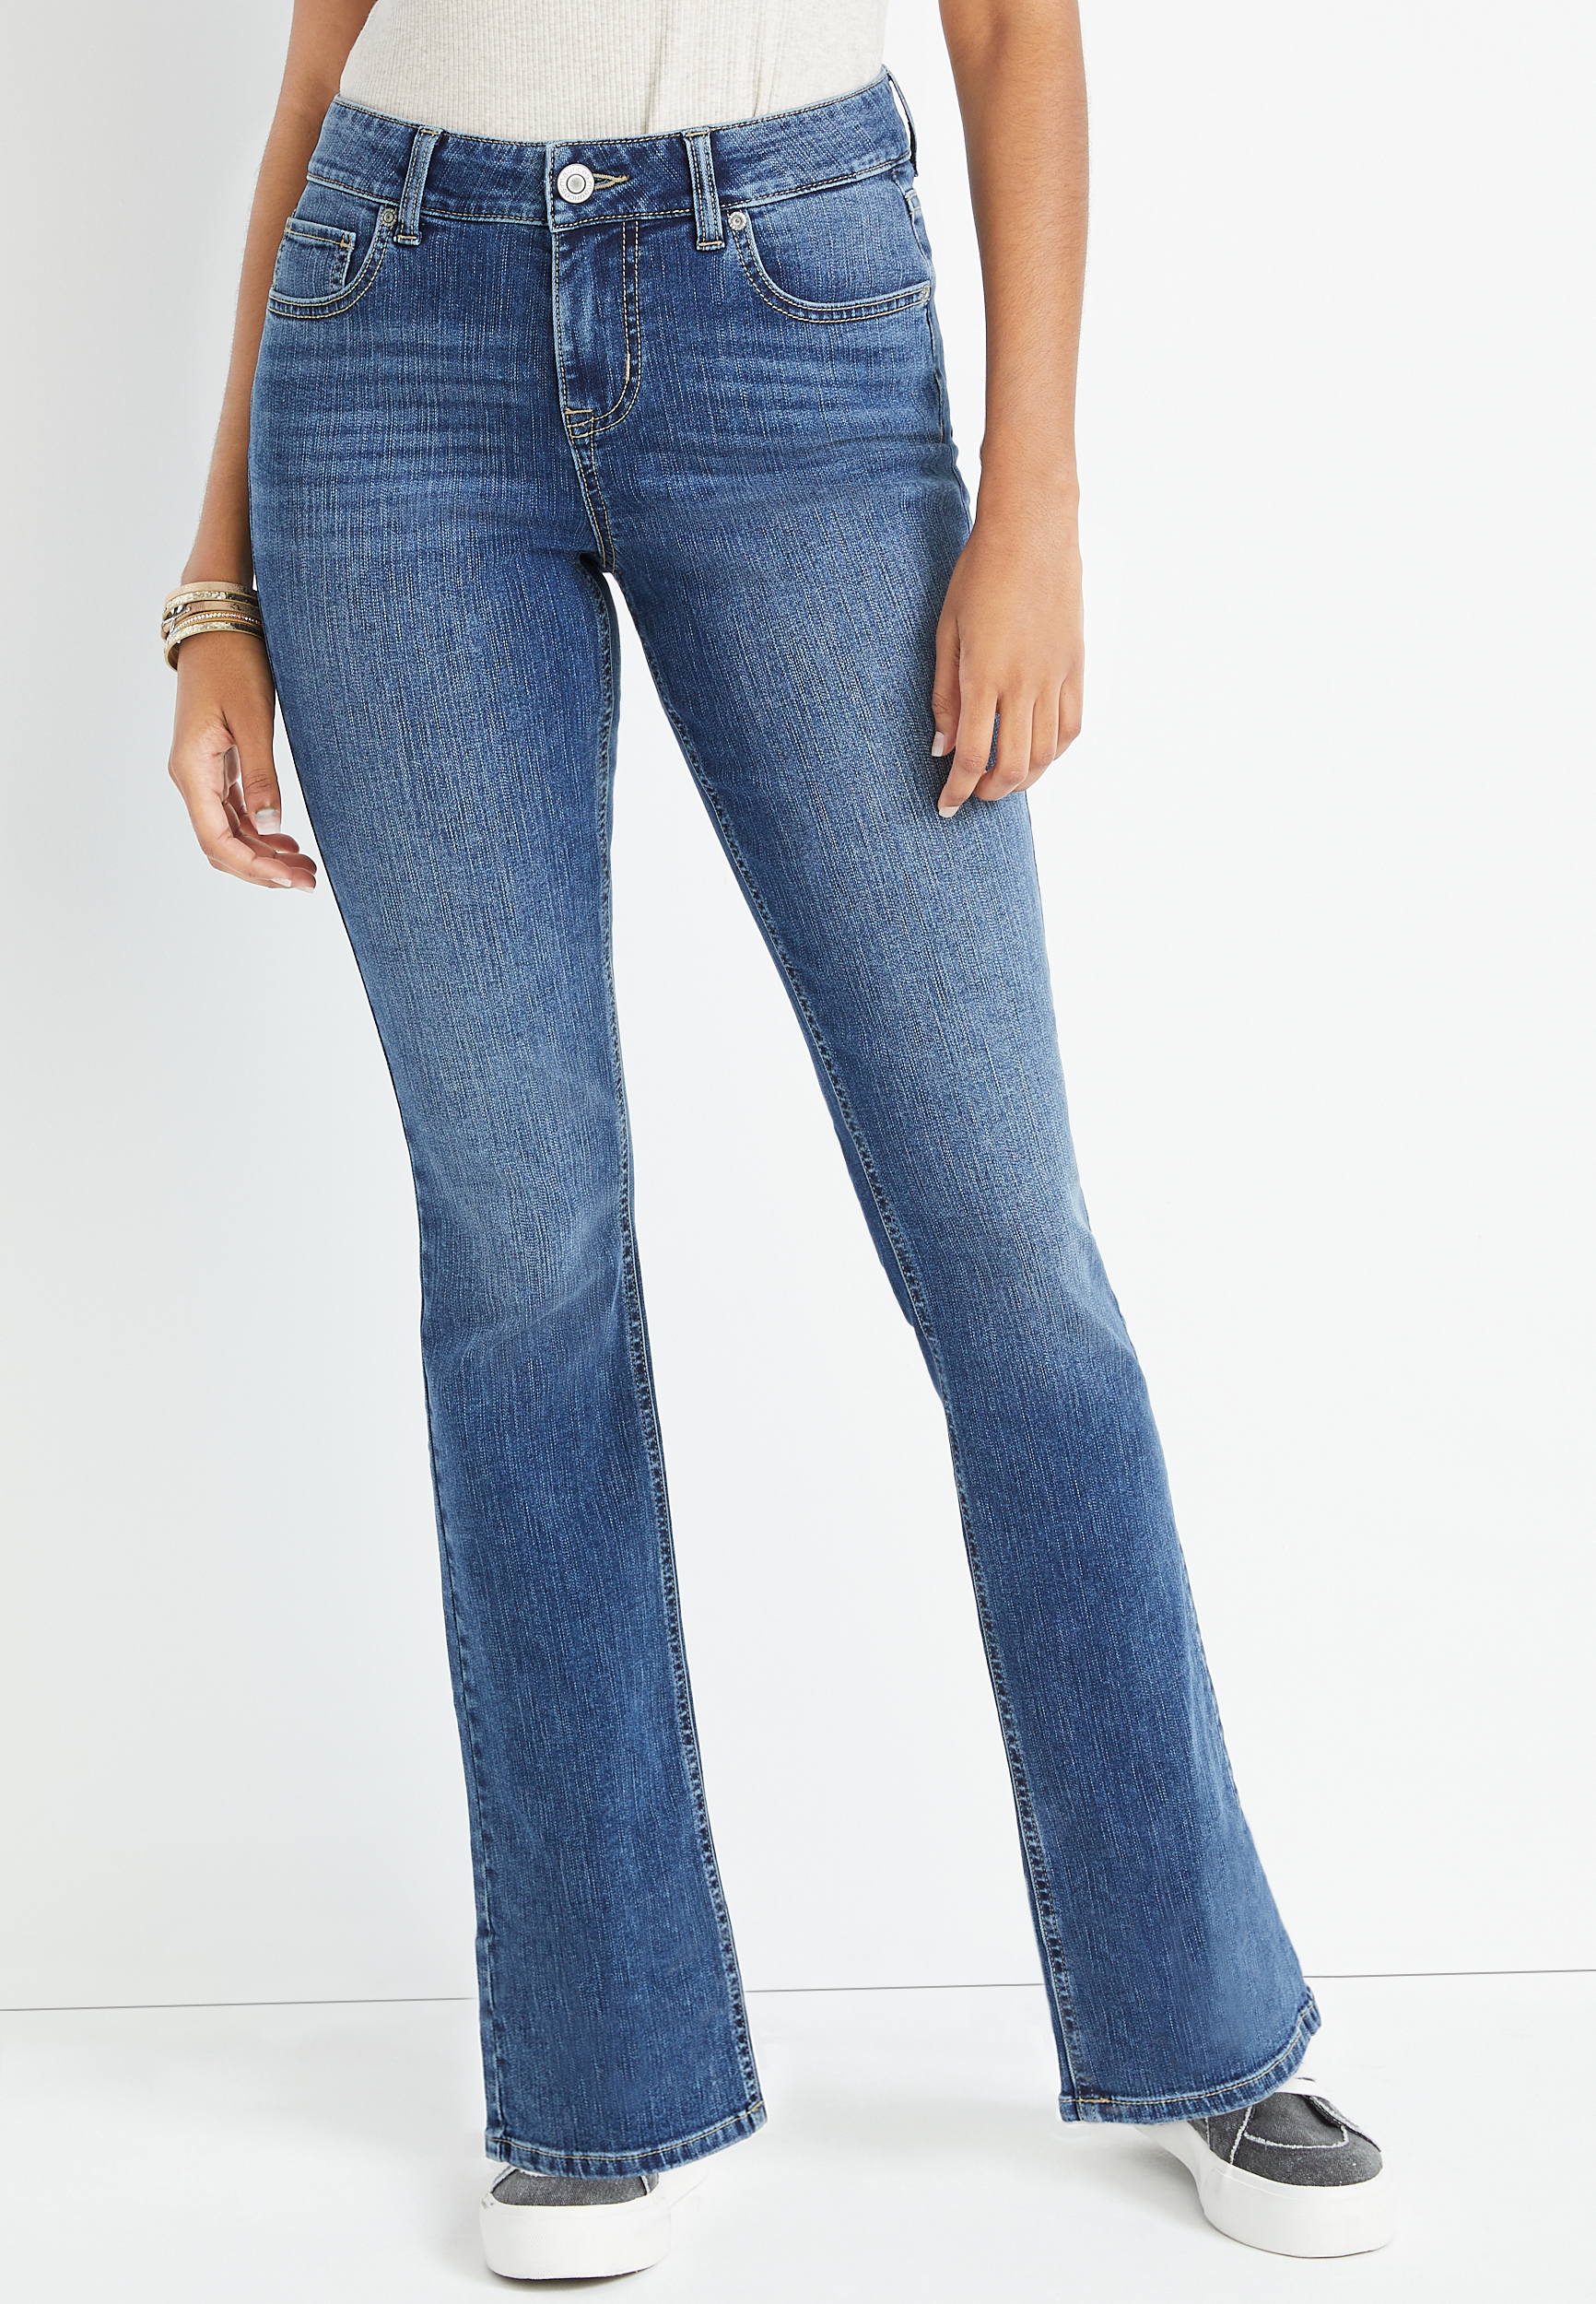 m jeans by maurices™ Classic Slim Boot Mid Rise Jean | maurices